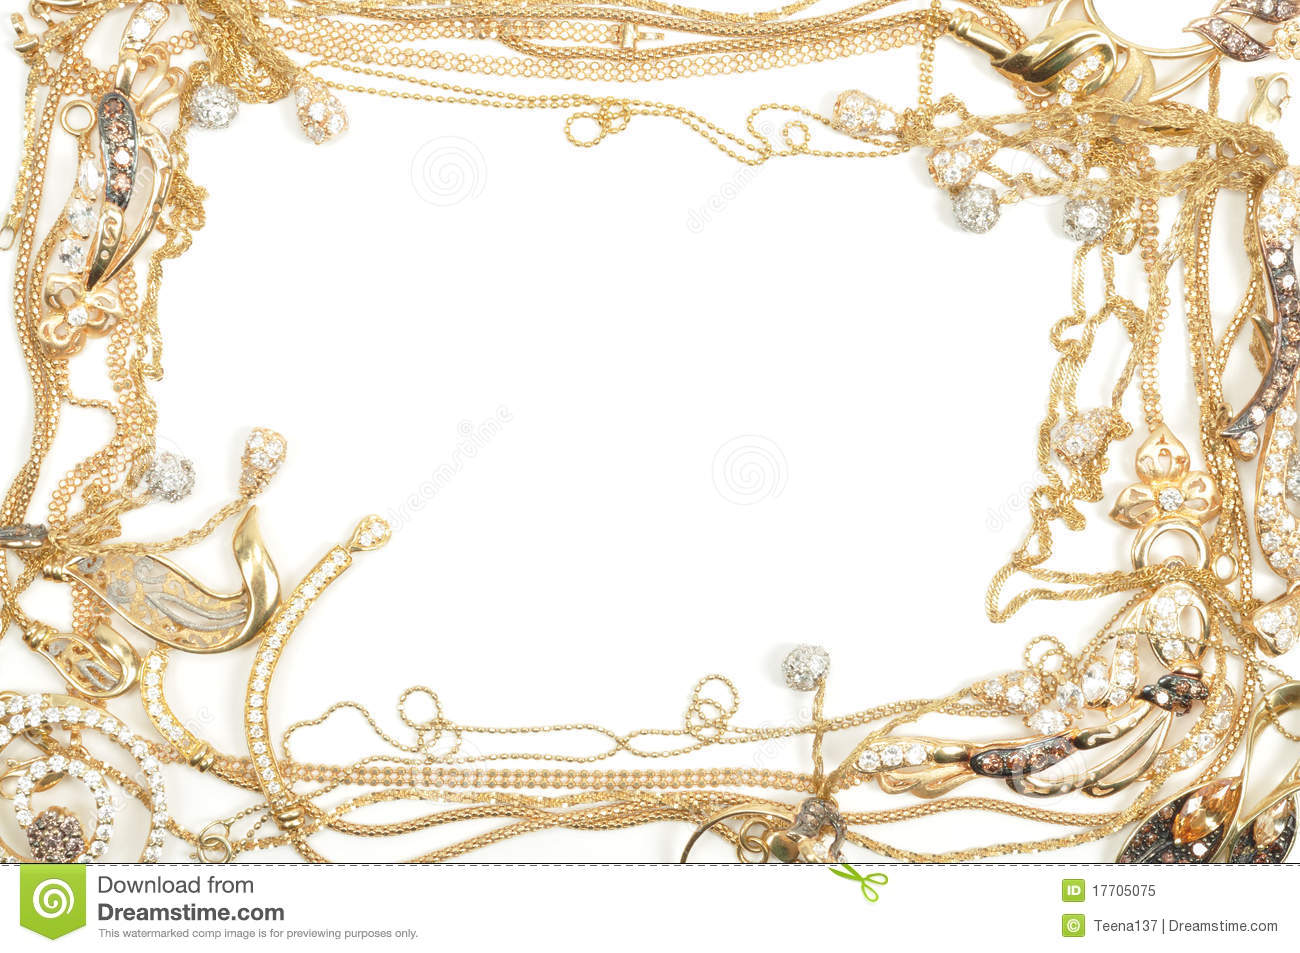 Jewelry Border Clipart Gold Frame Royalty Free Stock Photo   Image